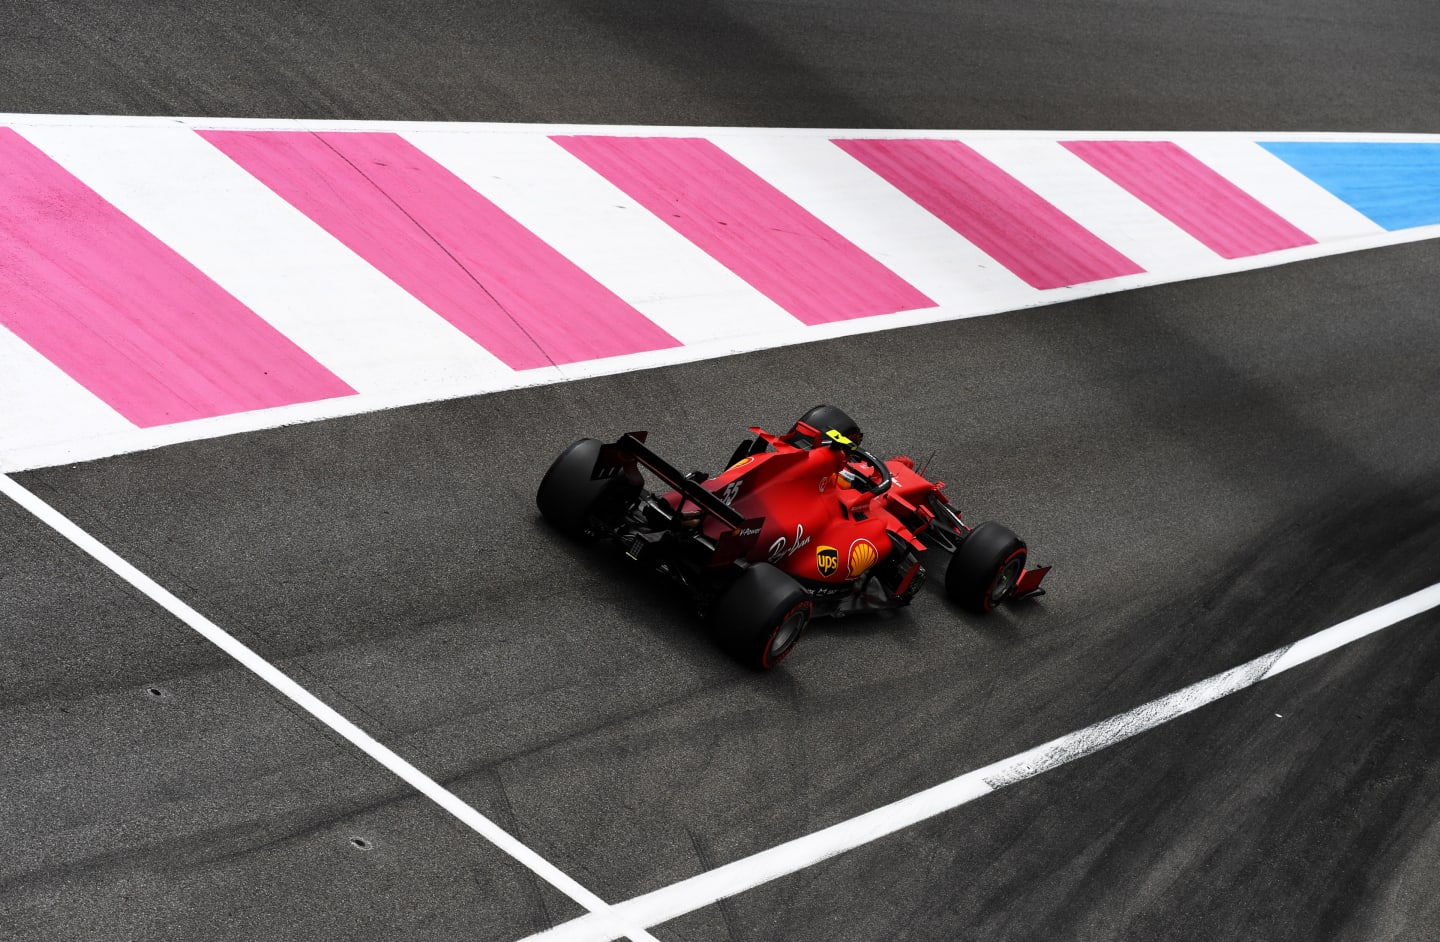 LE CASTELLET, FRANCE - JUNE 19: Carlos Sainz of Spain driving the (55) Scuderia Ferrari SF21 on track during qualifying ahead of the F1 Grand Prix of France at Circuit Paul Ricard on June 19, 2021 in Le Castellet, France. (Photo by Rudy Carezzevoli/Getty Images)